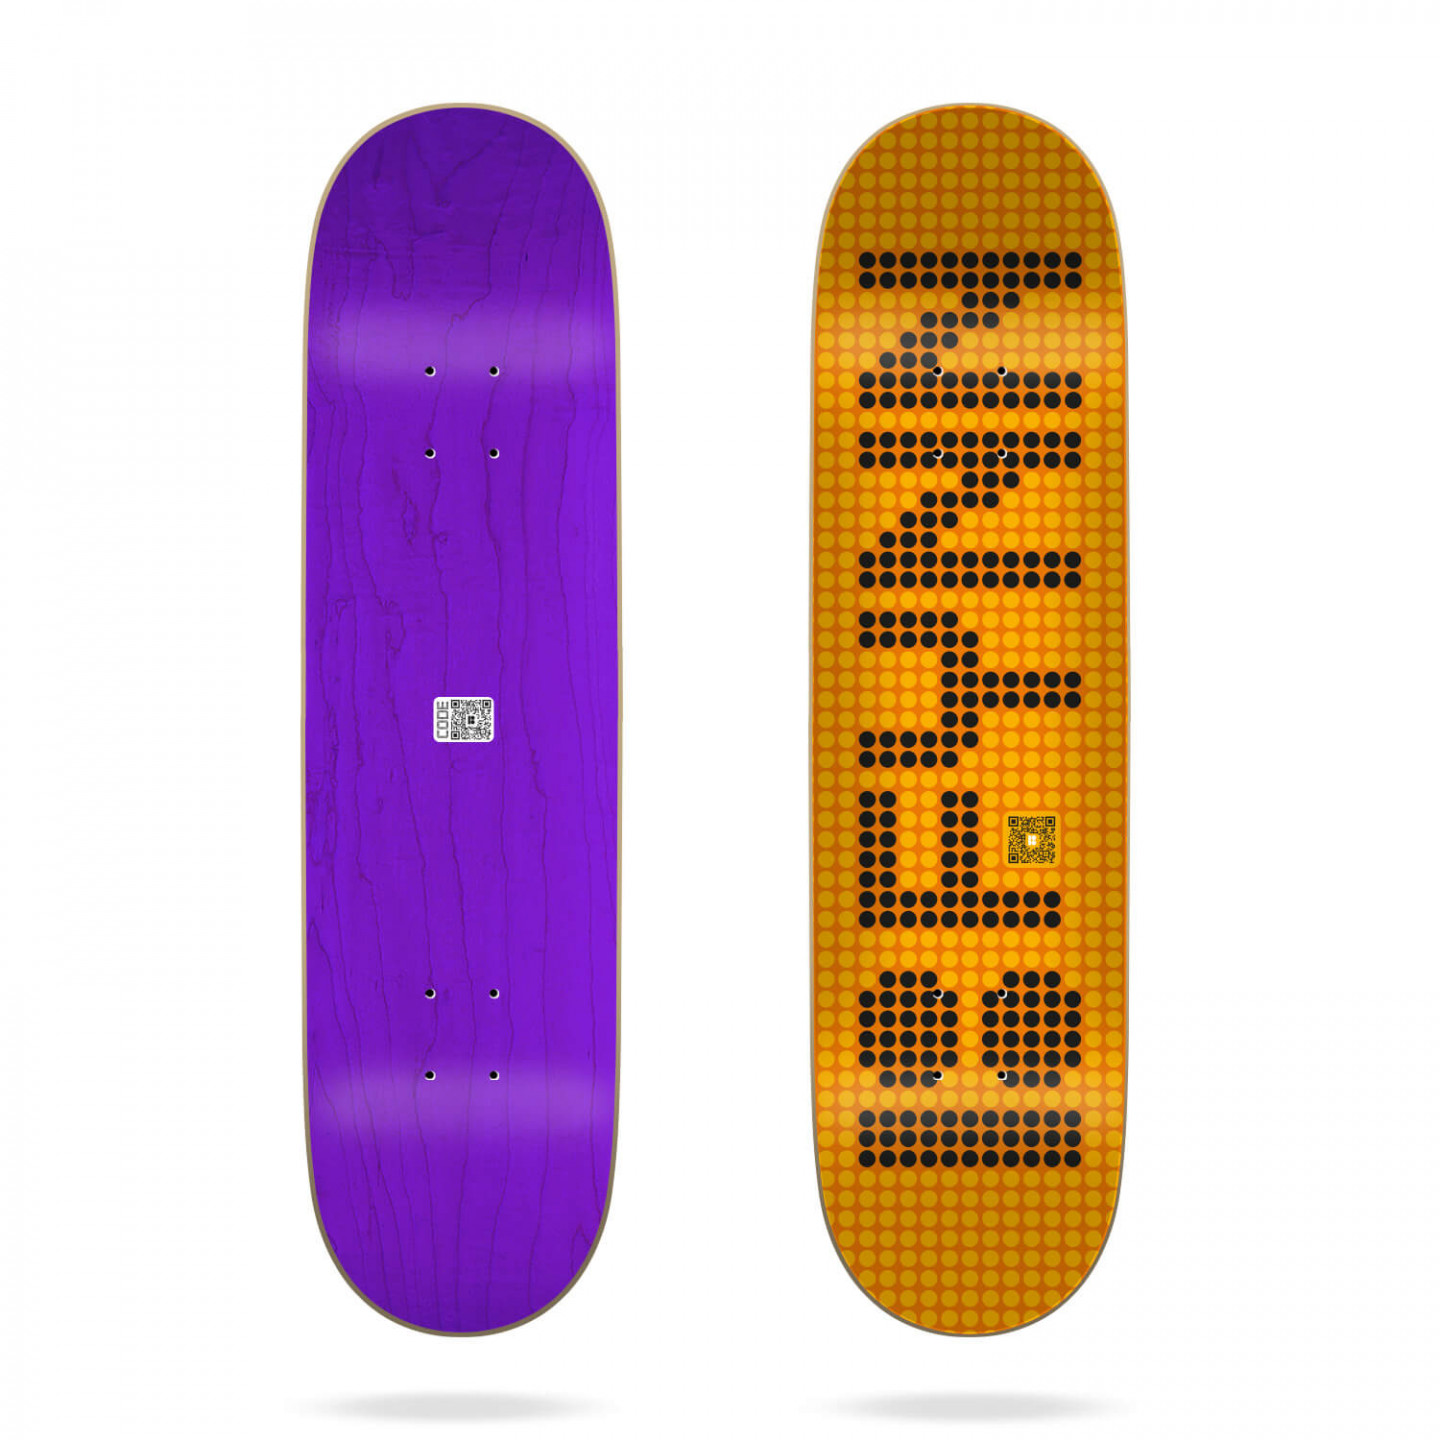 LC BOARDS Fingerboard Boxy Old School Shape Element Graphic Brand New 